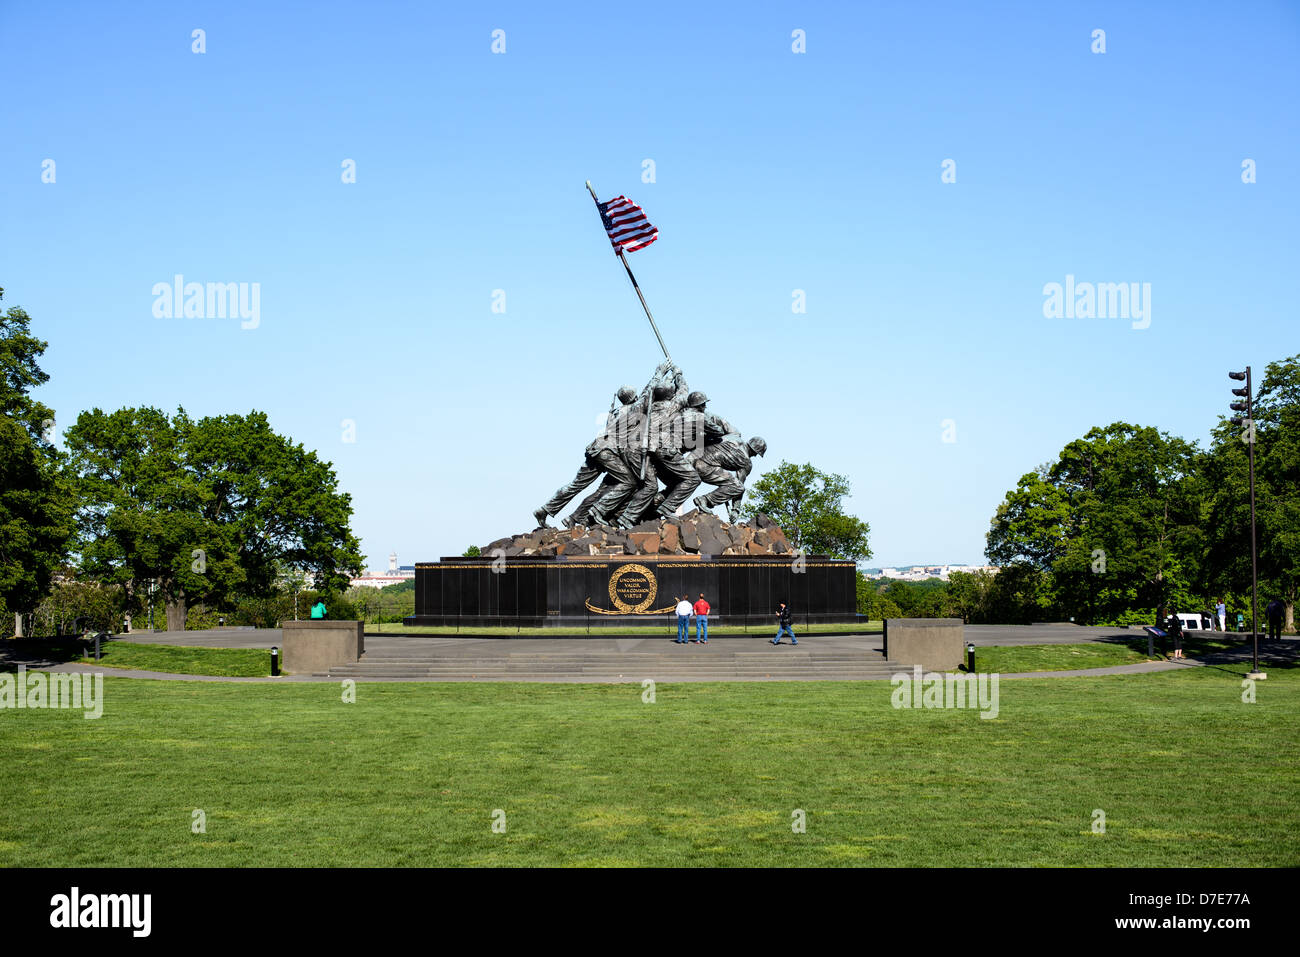 A wide-angle shot of the western face of the Iwo Jima Memorial (formally the Marine Corps War Memorial) in Arlington, Virginia, next to Arlington National Cemetery. The monument was designed by Felix de Wledon and is based on an iconic Associated Press photo called the Raising the Flag on Iwo Jima by Joe Rosenthal. It was dedicated in 1954. Stock Photo